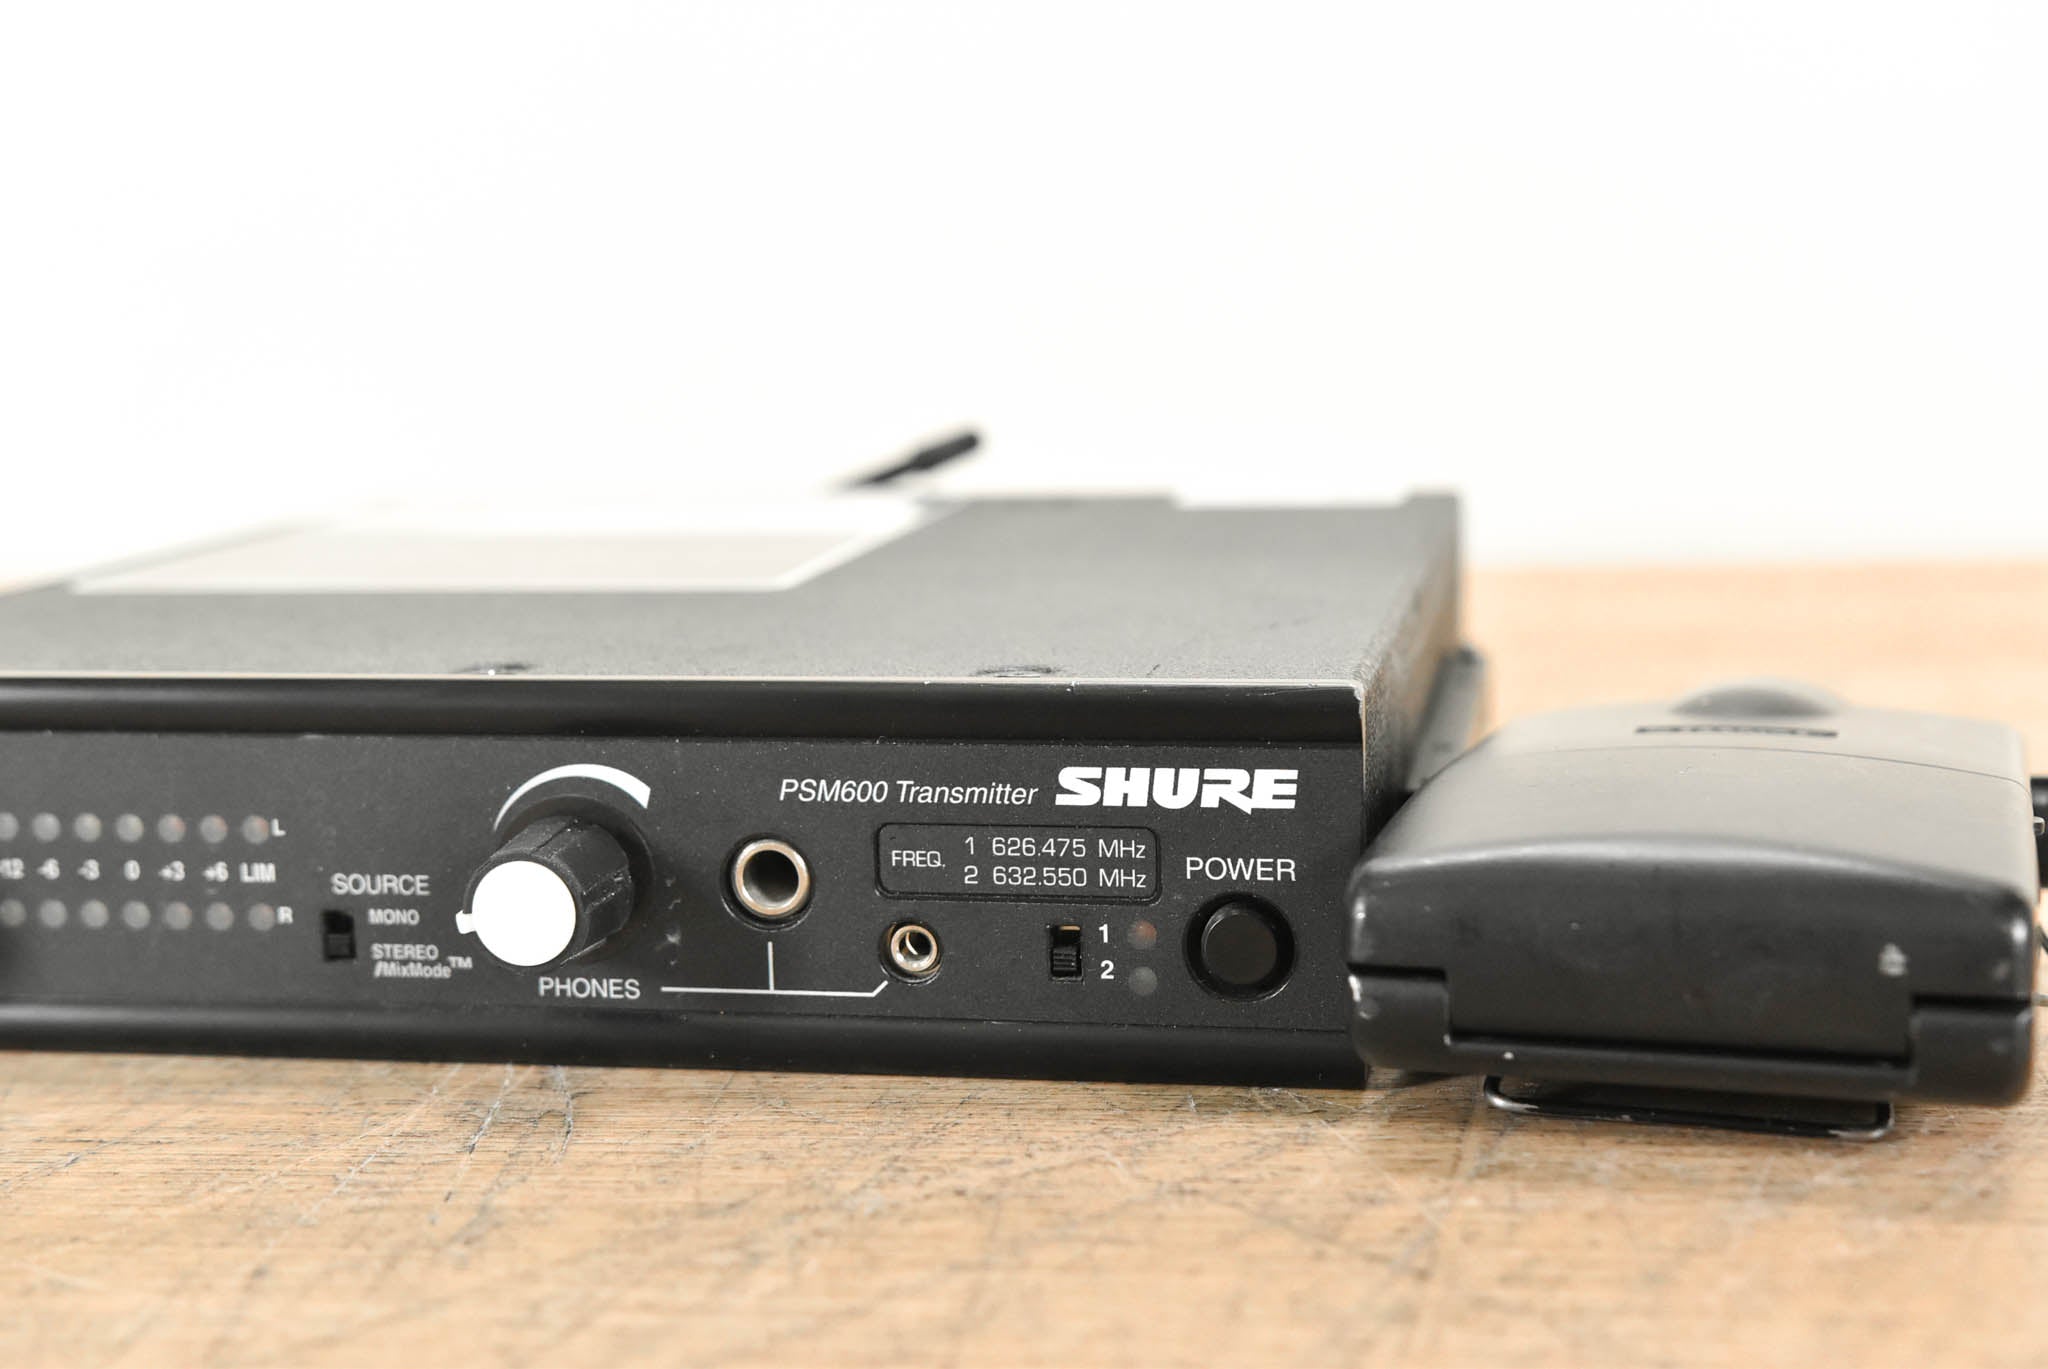 Shure PSM600 Wireless In-Ear Monitoring System - 626.475 and 632.550 MHz